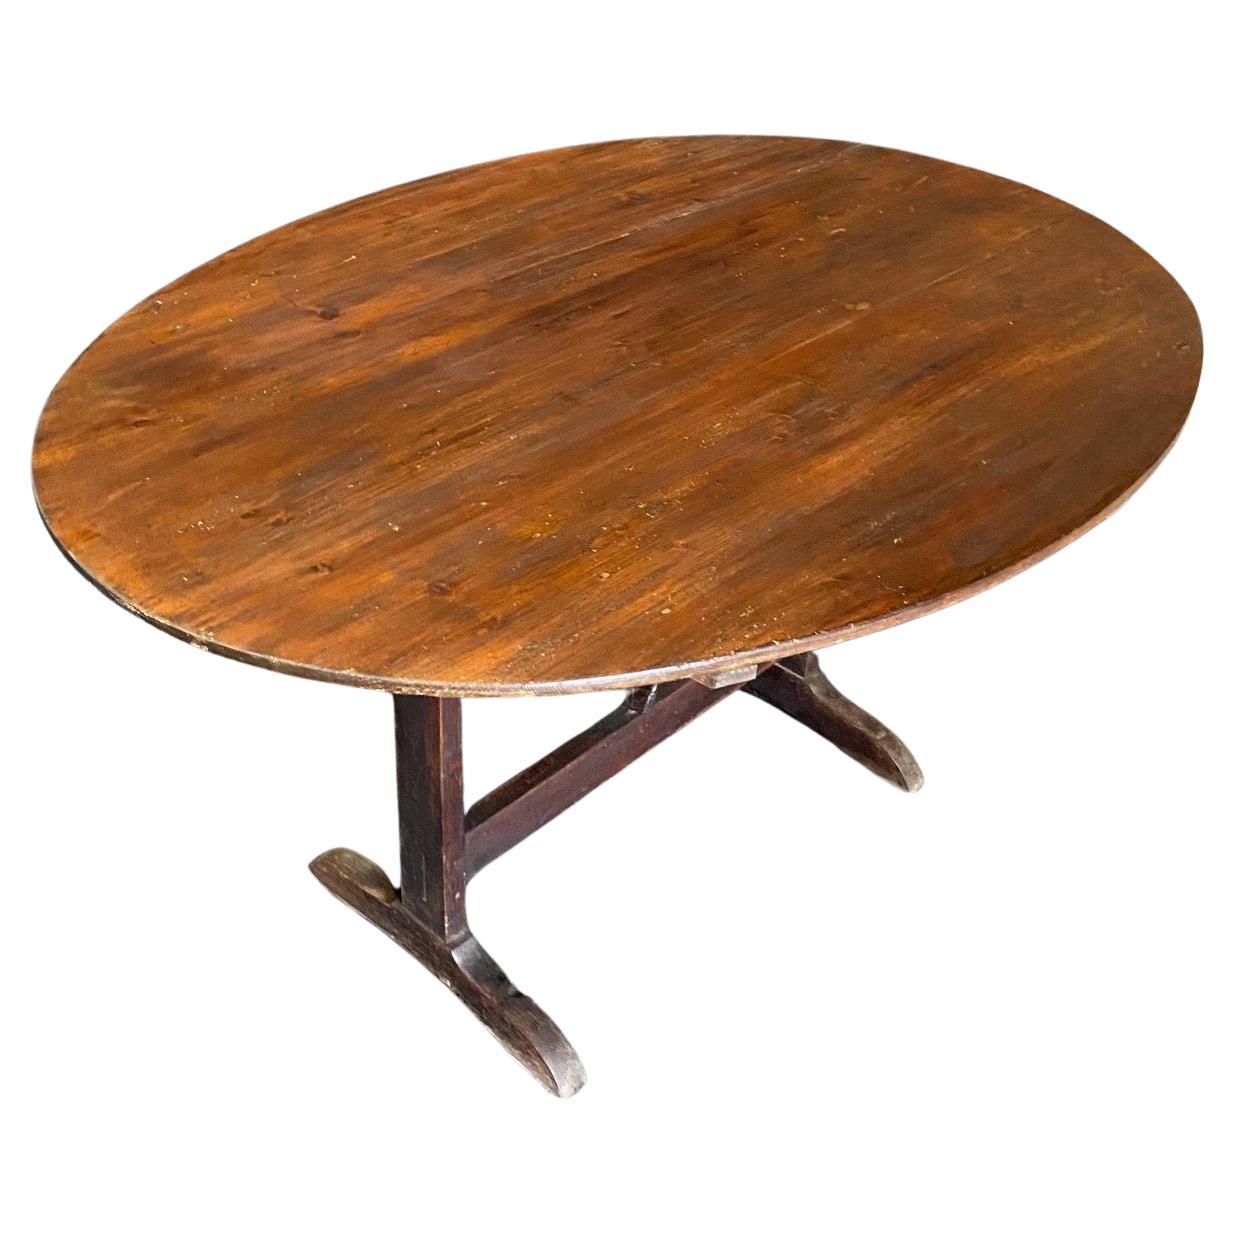 Large French Early 19th Century Oval Wine Tasting or Tilt-Top Dining Table For Sale